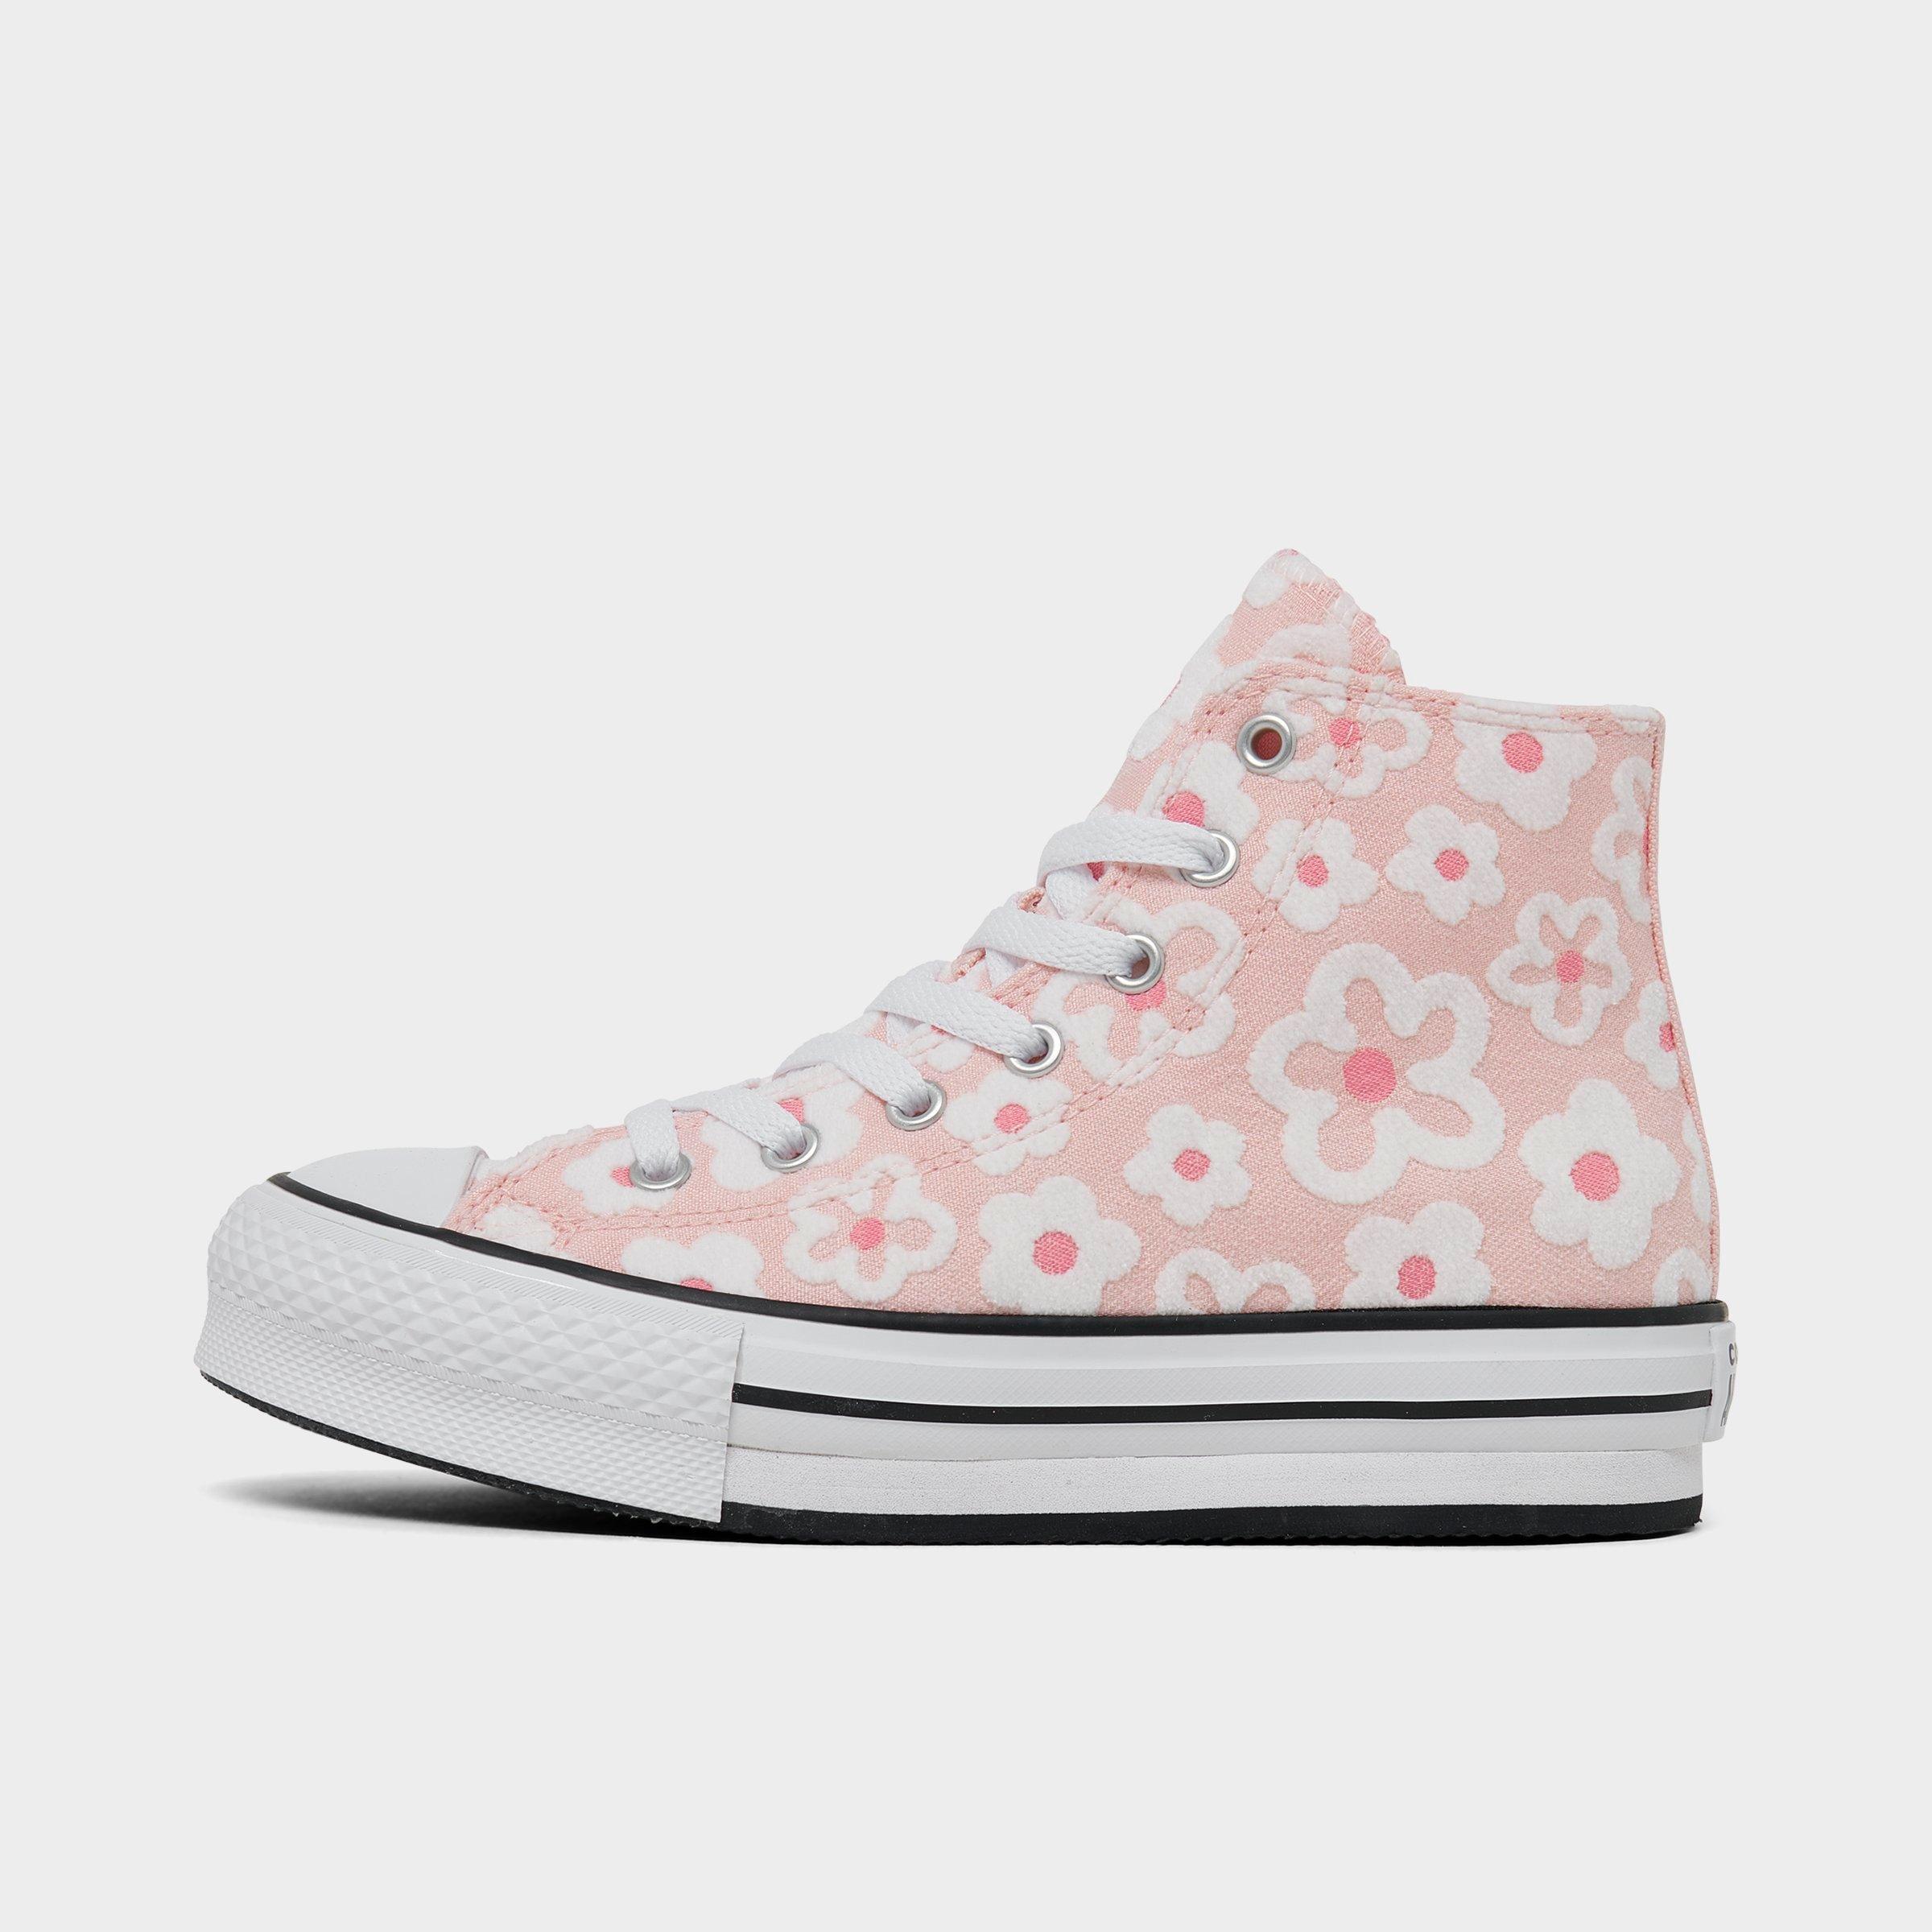 CONVERSE CONVERSE GIRLS' LITTLE KIDS' CHUCK TAYLOR ALL STAR FLORAL EMBROIDERY LIFT PLATFORM CASUAL SHOES SIZE